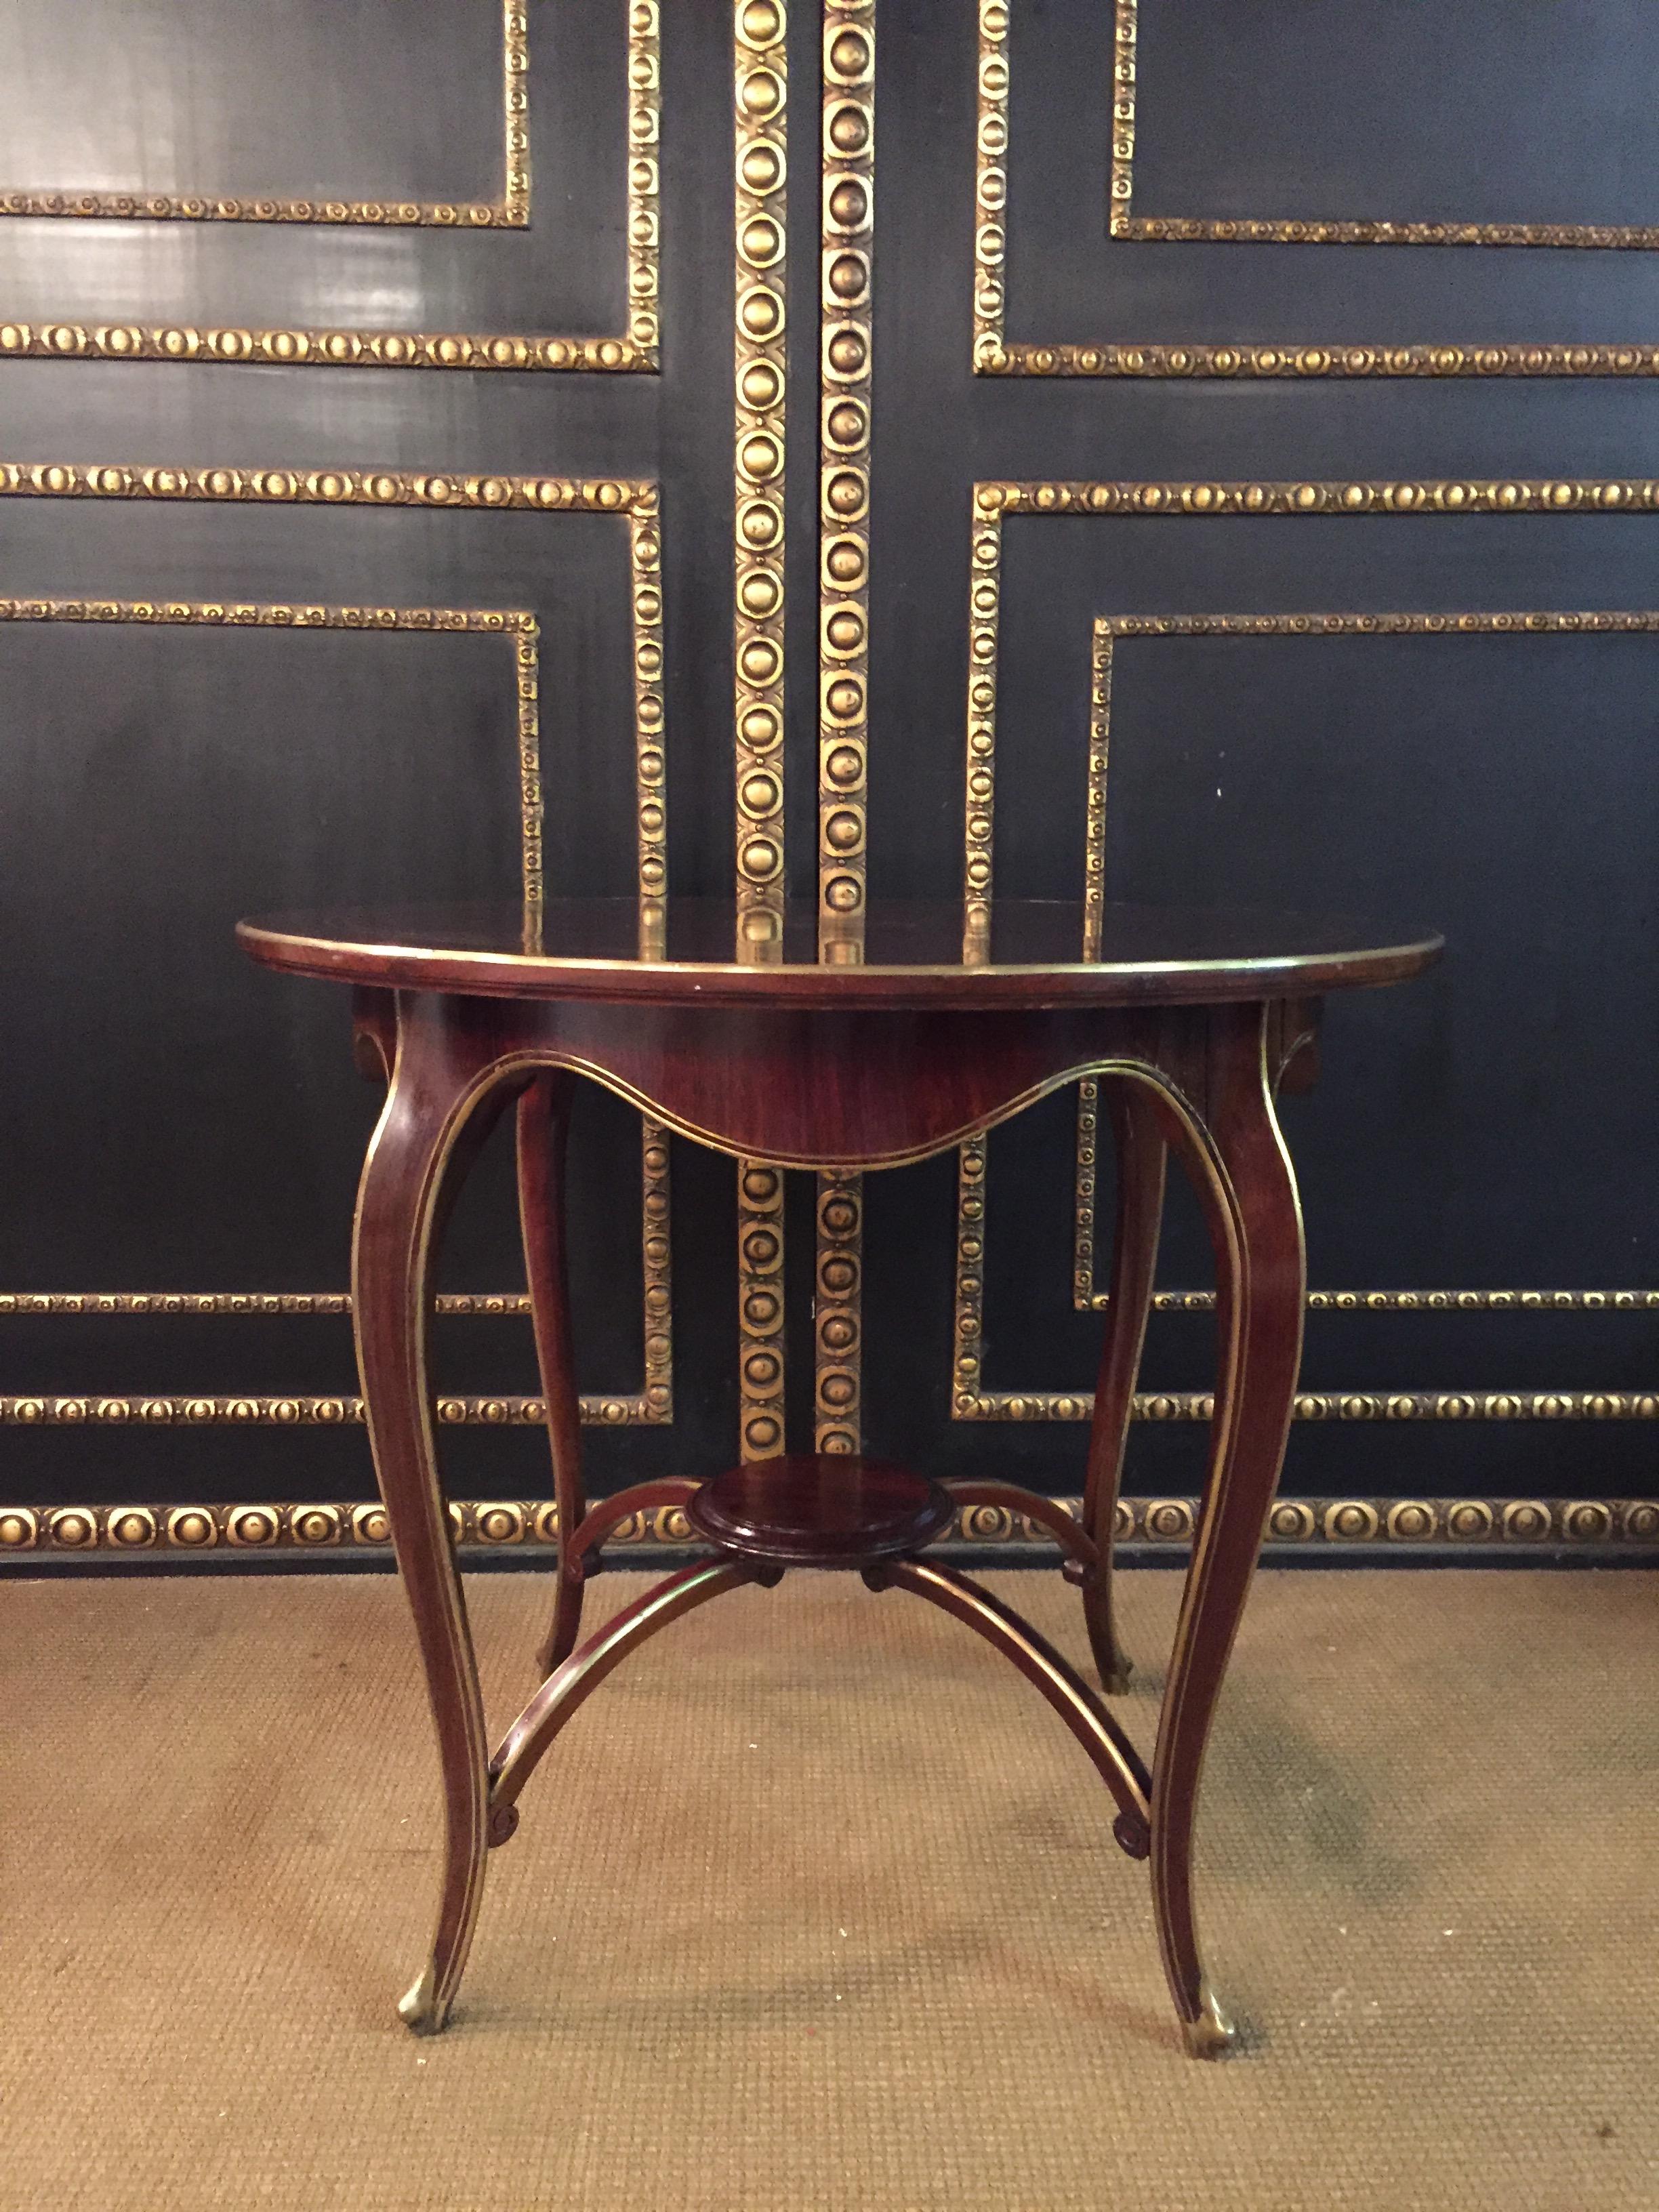 French Antique Biedermeier Table Mahogany Inlaid with Mother of Pearl inlay 1870 For Sale